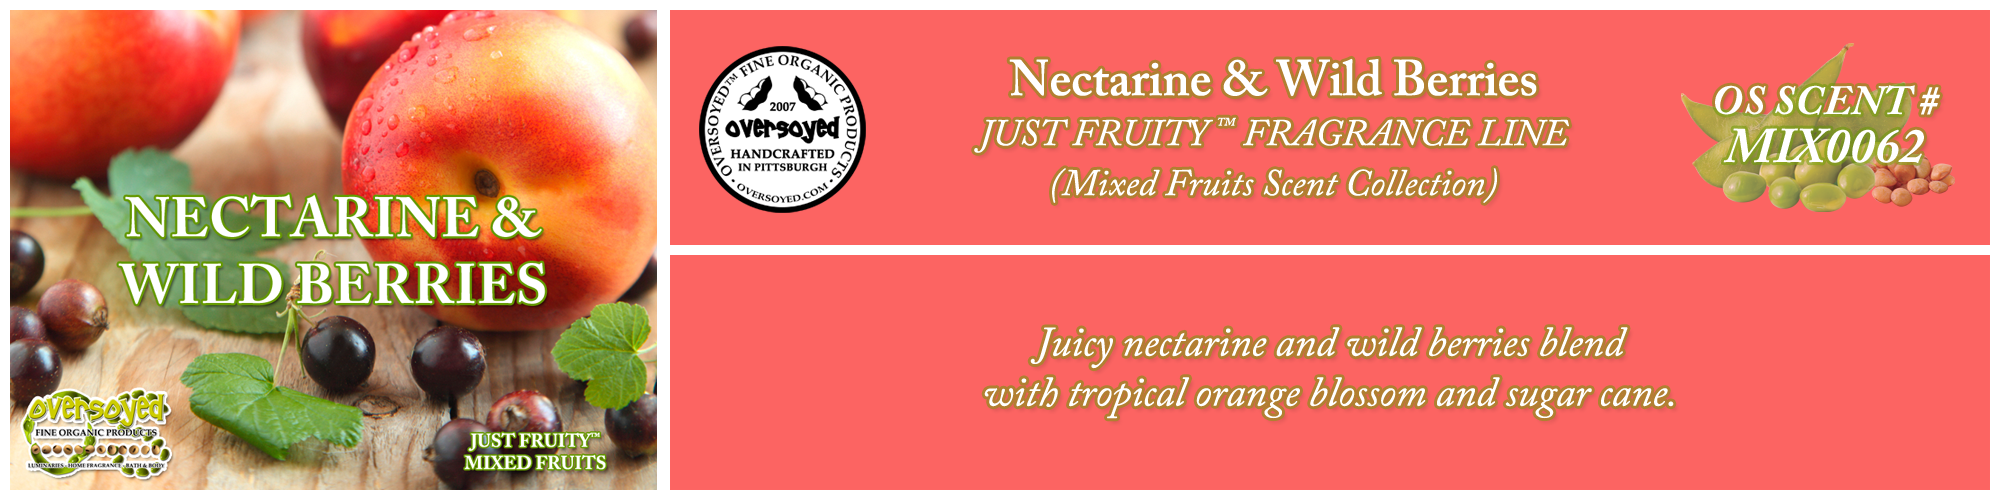 Nectarine & Wild Berries Handcrafted Products Collection